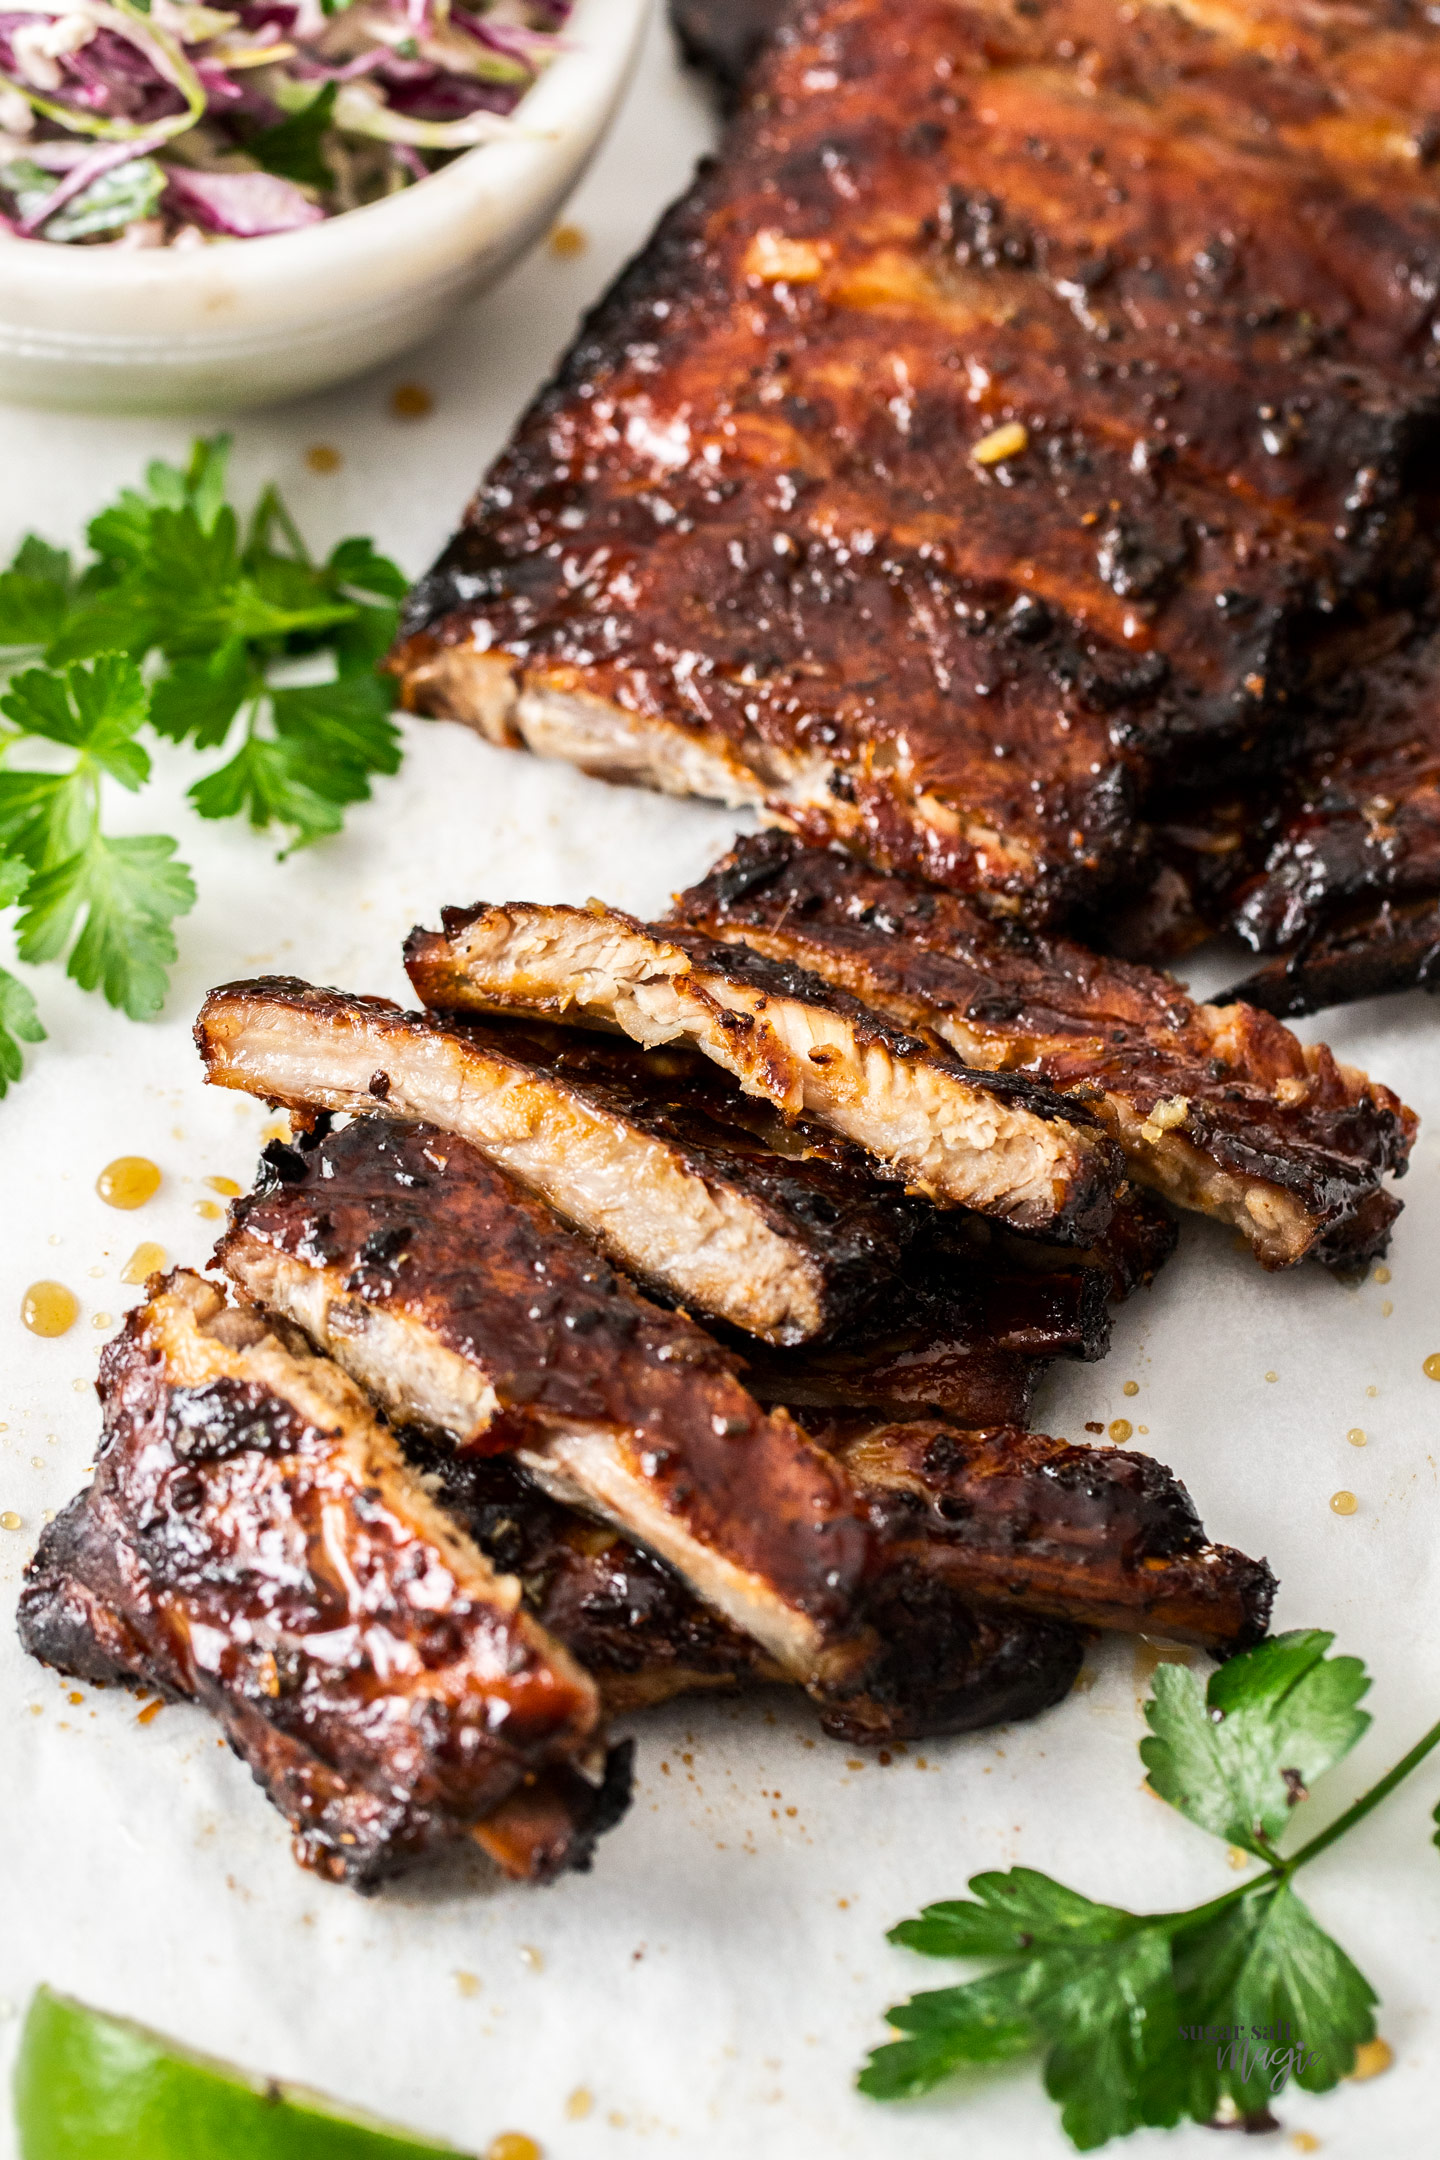 Cooked glazed pork ribs on a baking tray.